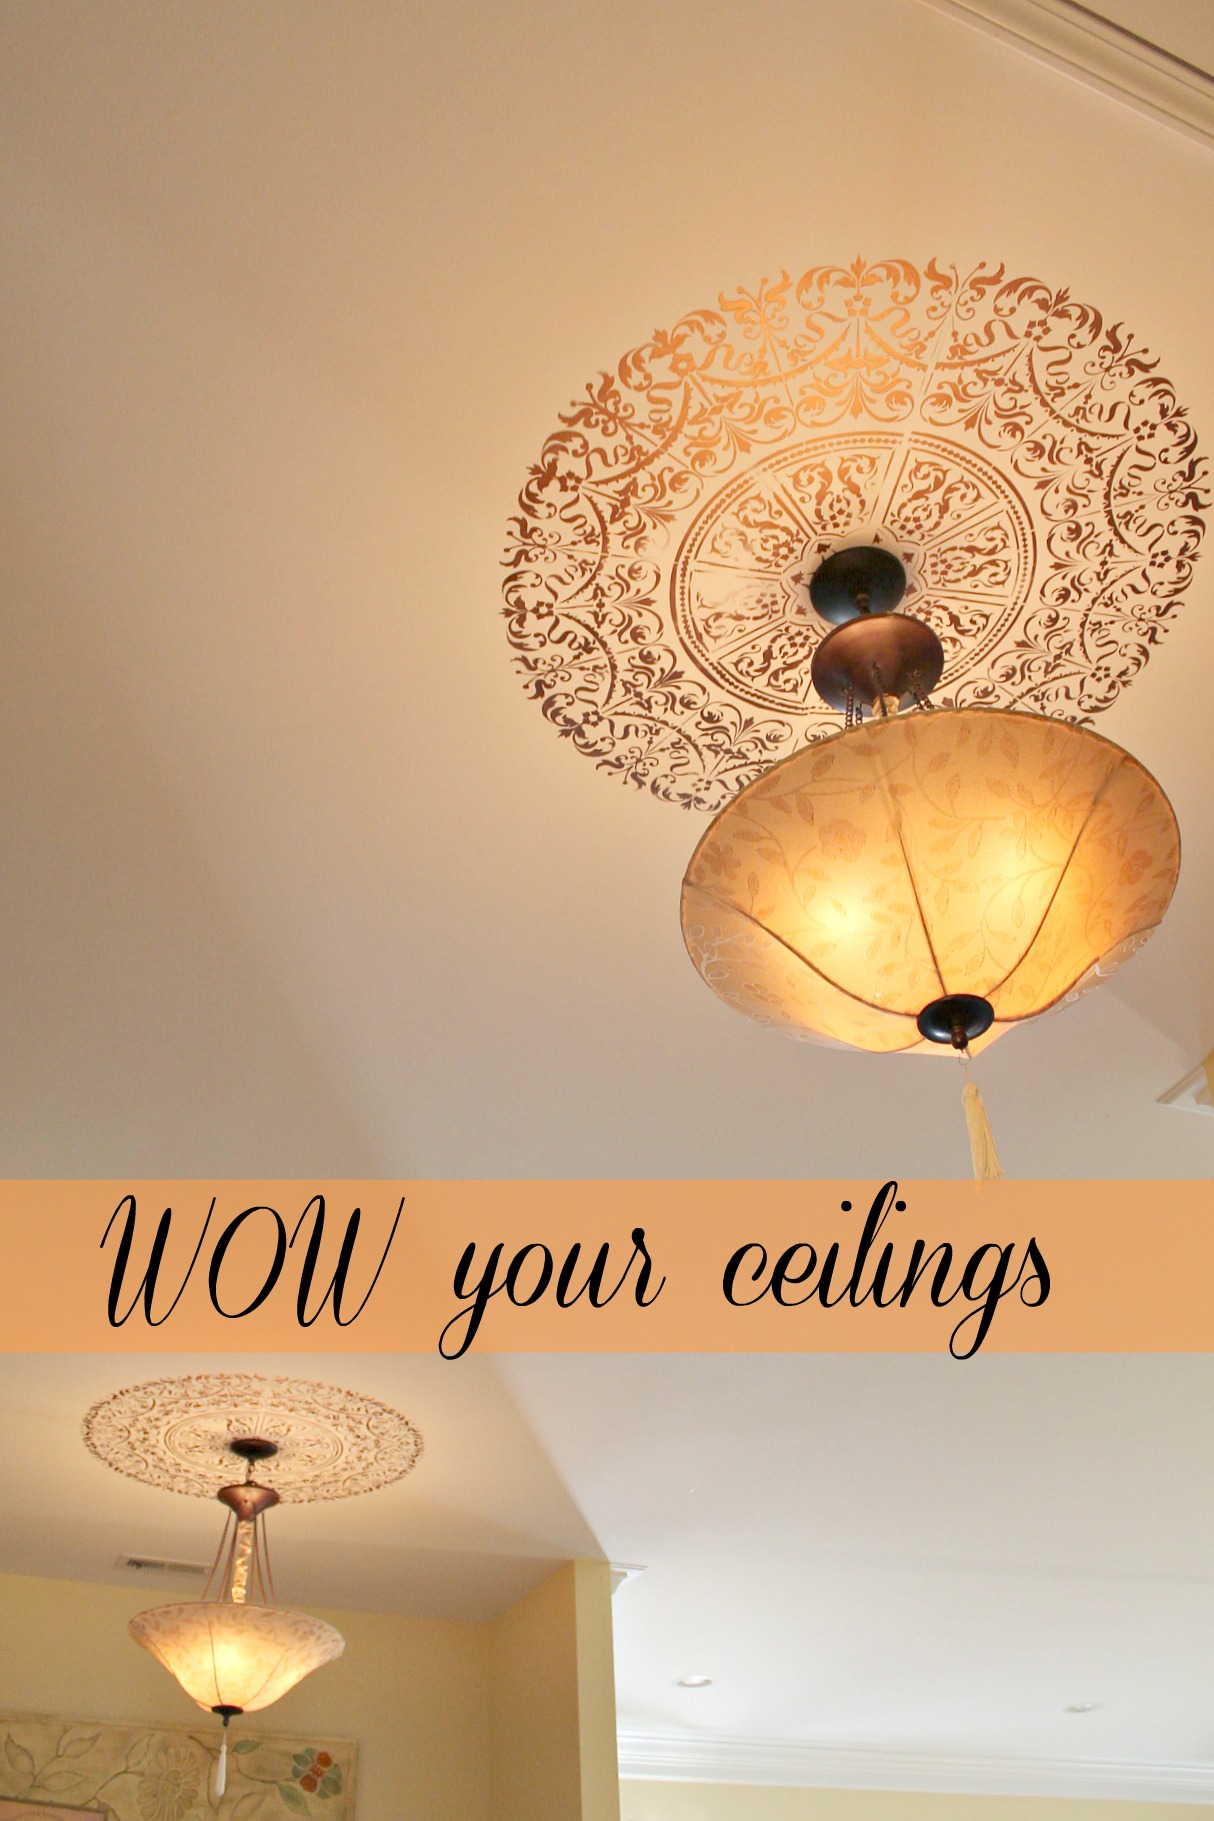 wow your ceilings